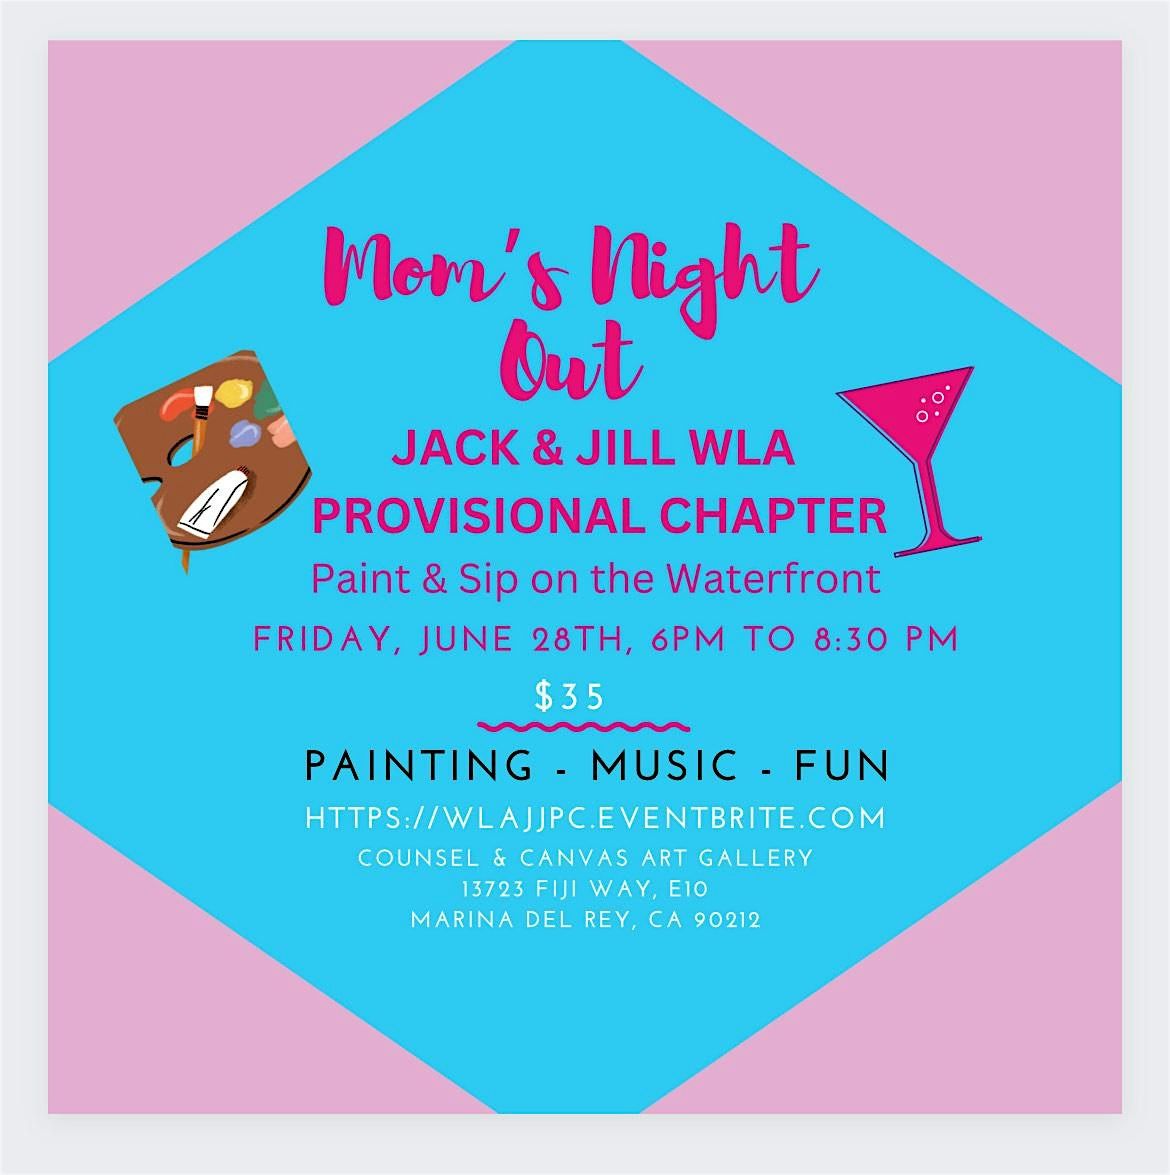 Mom's Night Out Paint and Sip - WLAJJPC